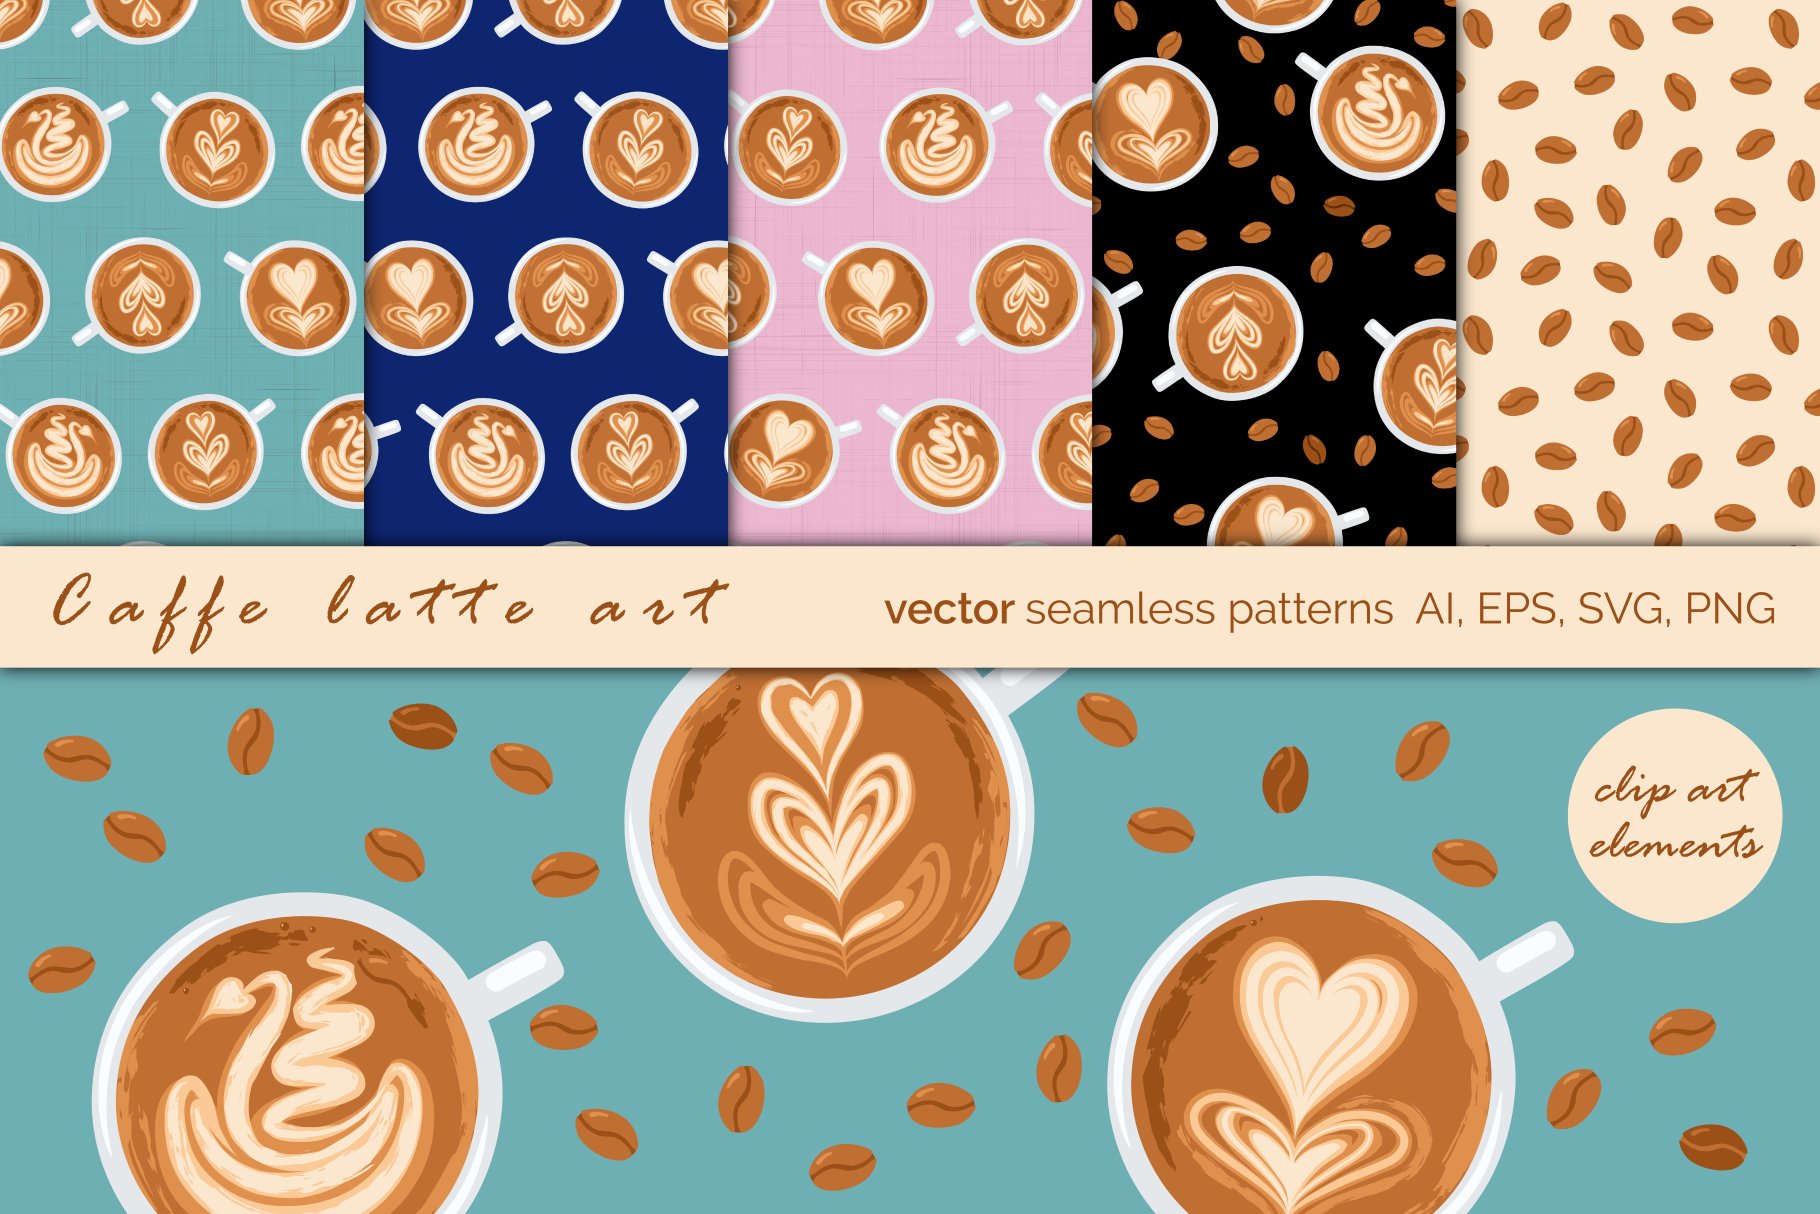 Coffee Art Cups Vector Patterns cover image.